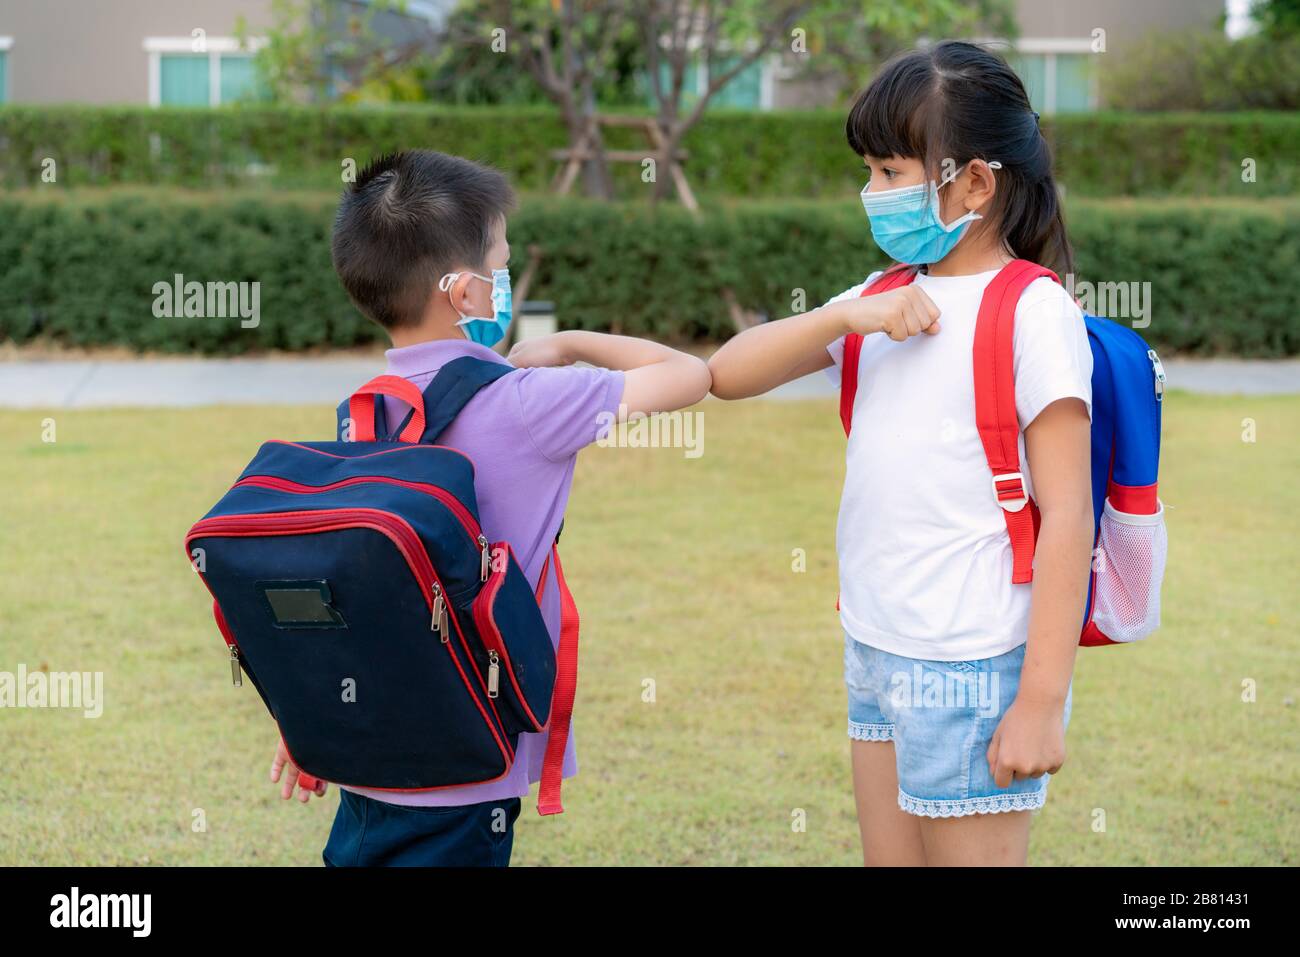 Elbow bump is new novel greeting to avoid the spread of coronavirus. Two Asian children preschool friends meet in  school park with bare hands. Instea Stock Photo